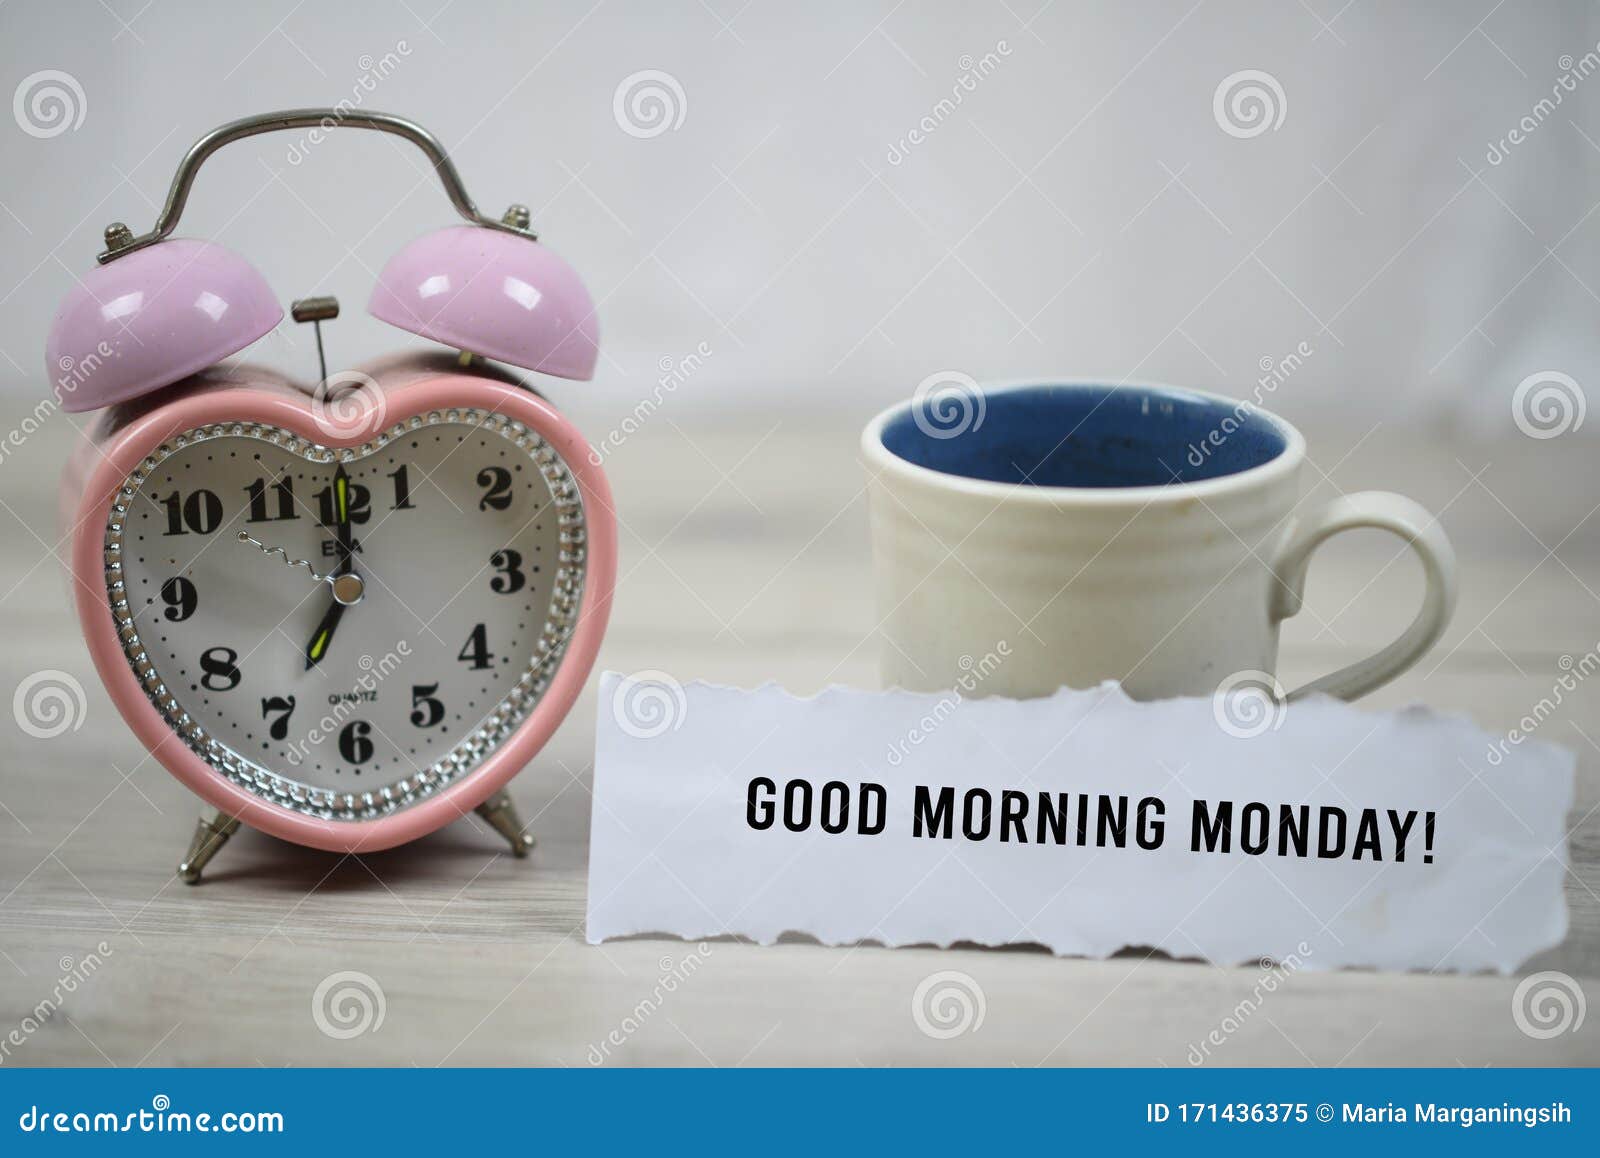 Inspirational Quote - Good Morning Monday. with Pink Desk Clock ...